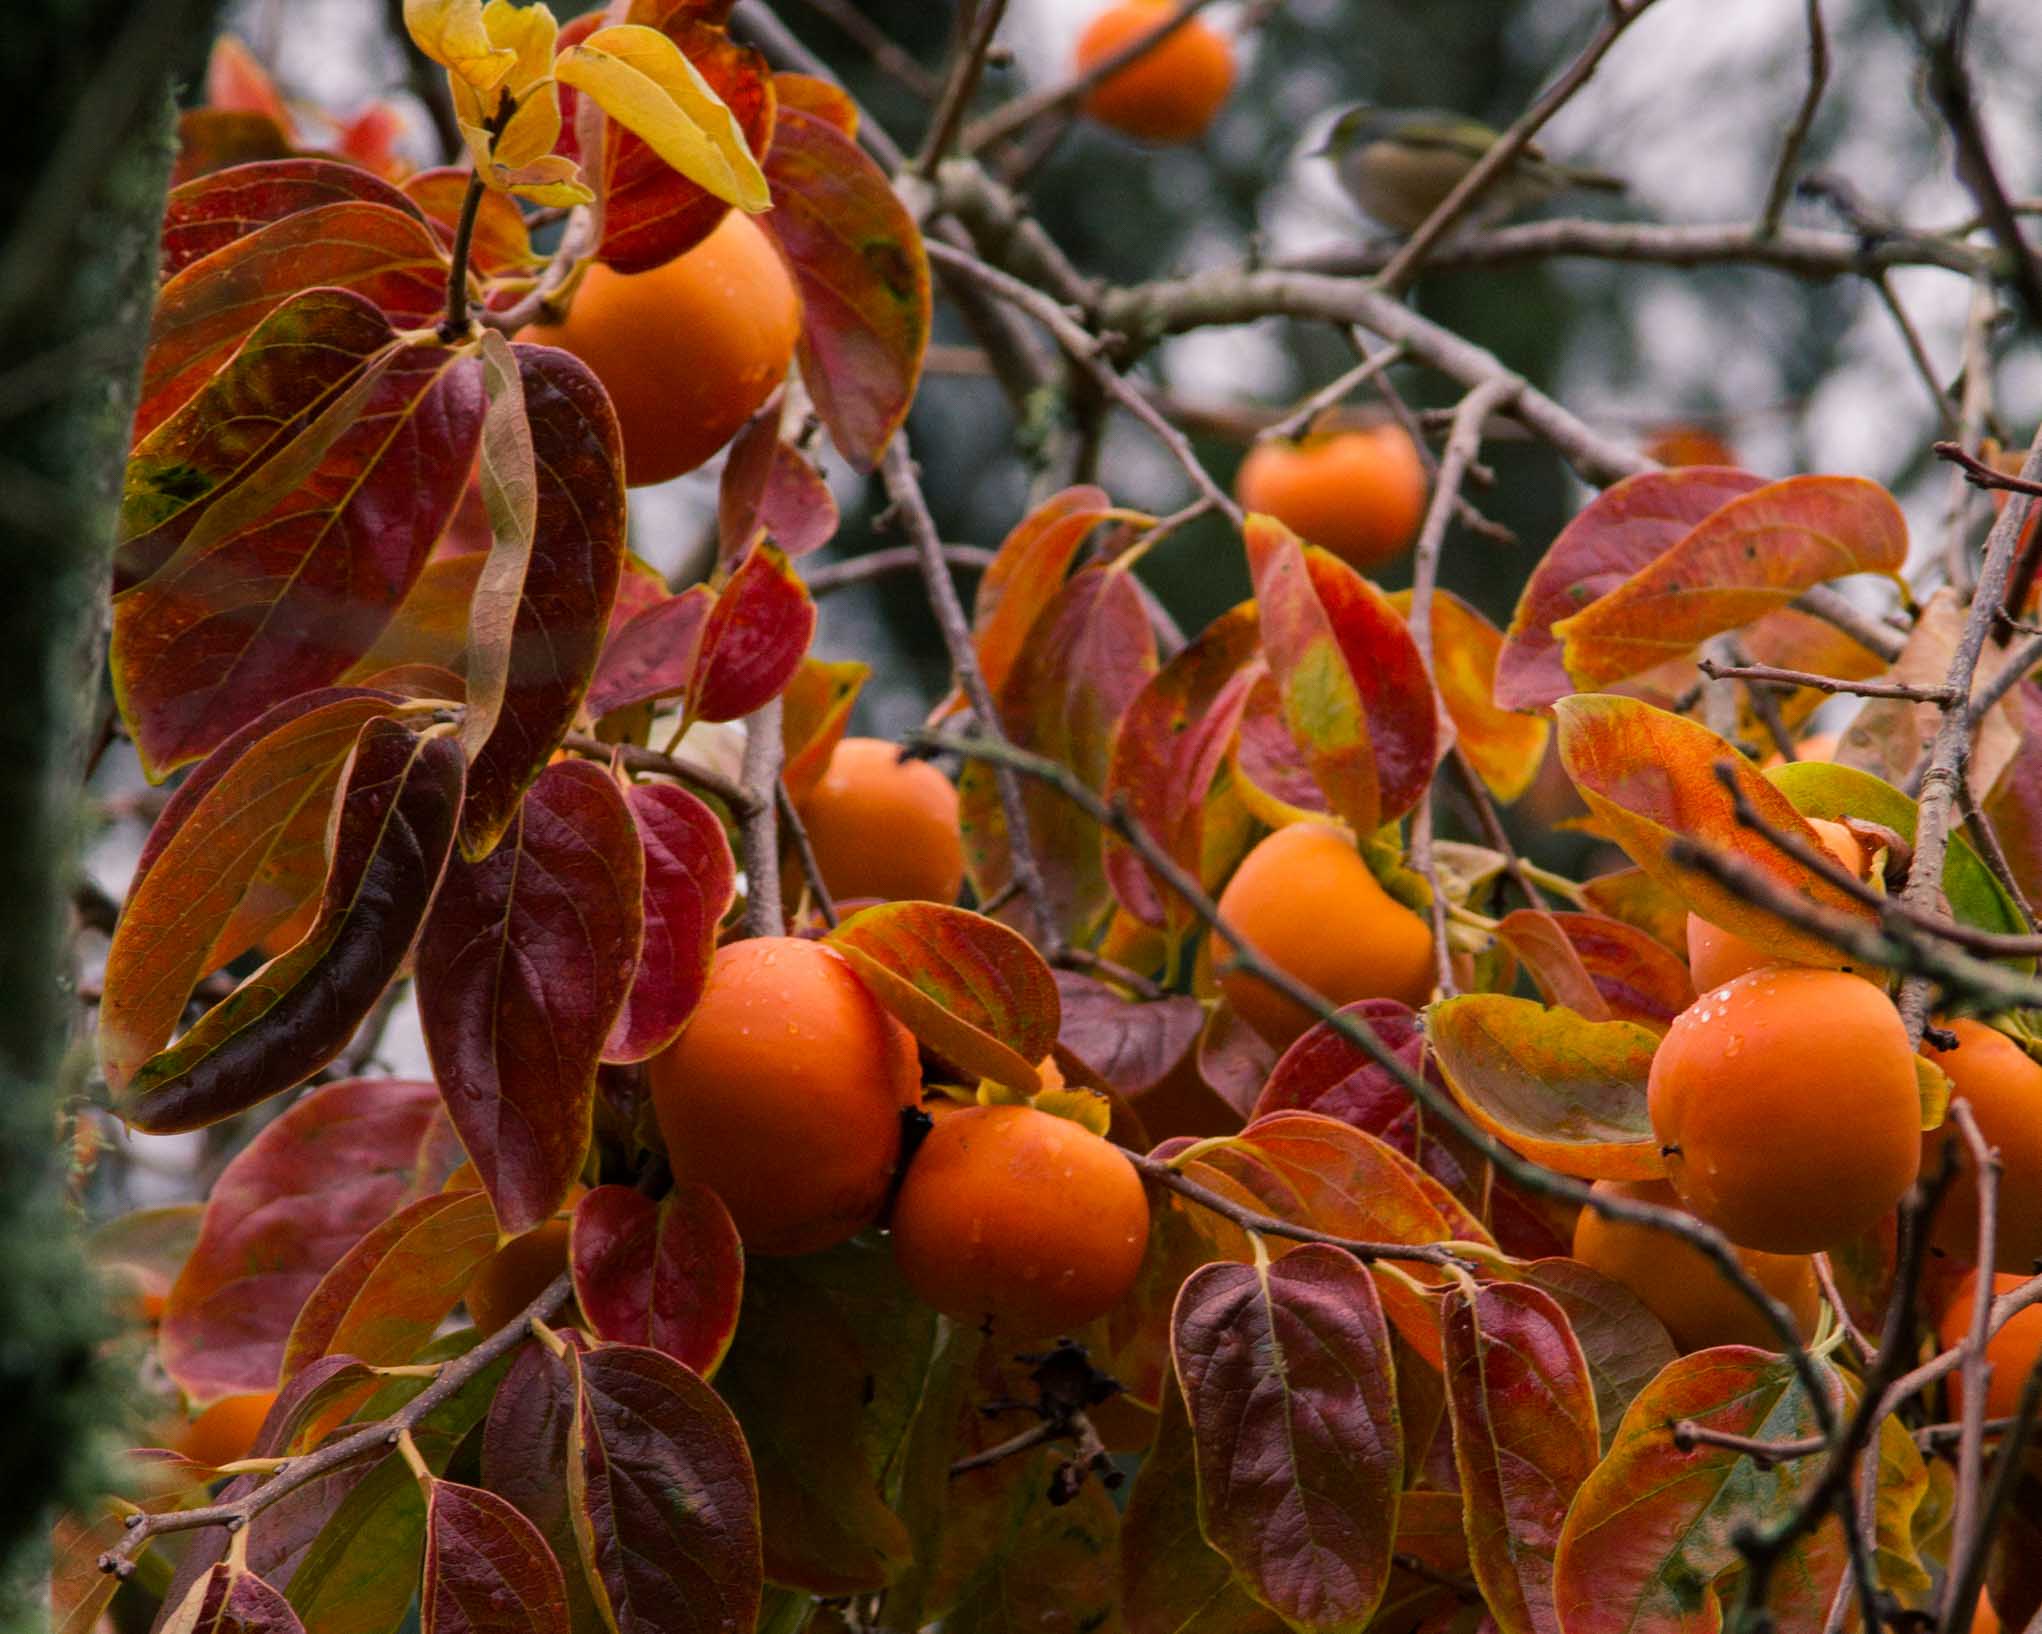 The Persimmon Orchard